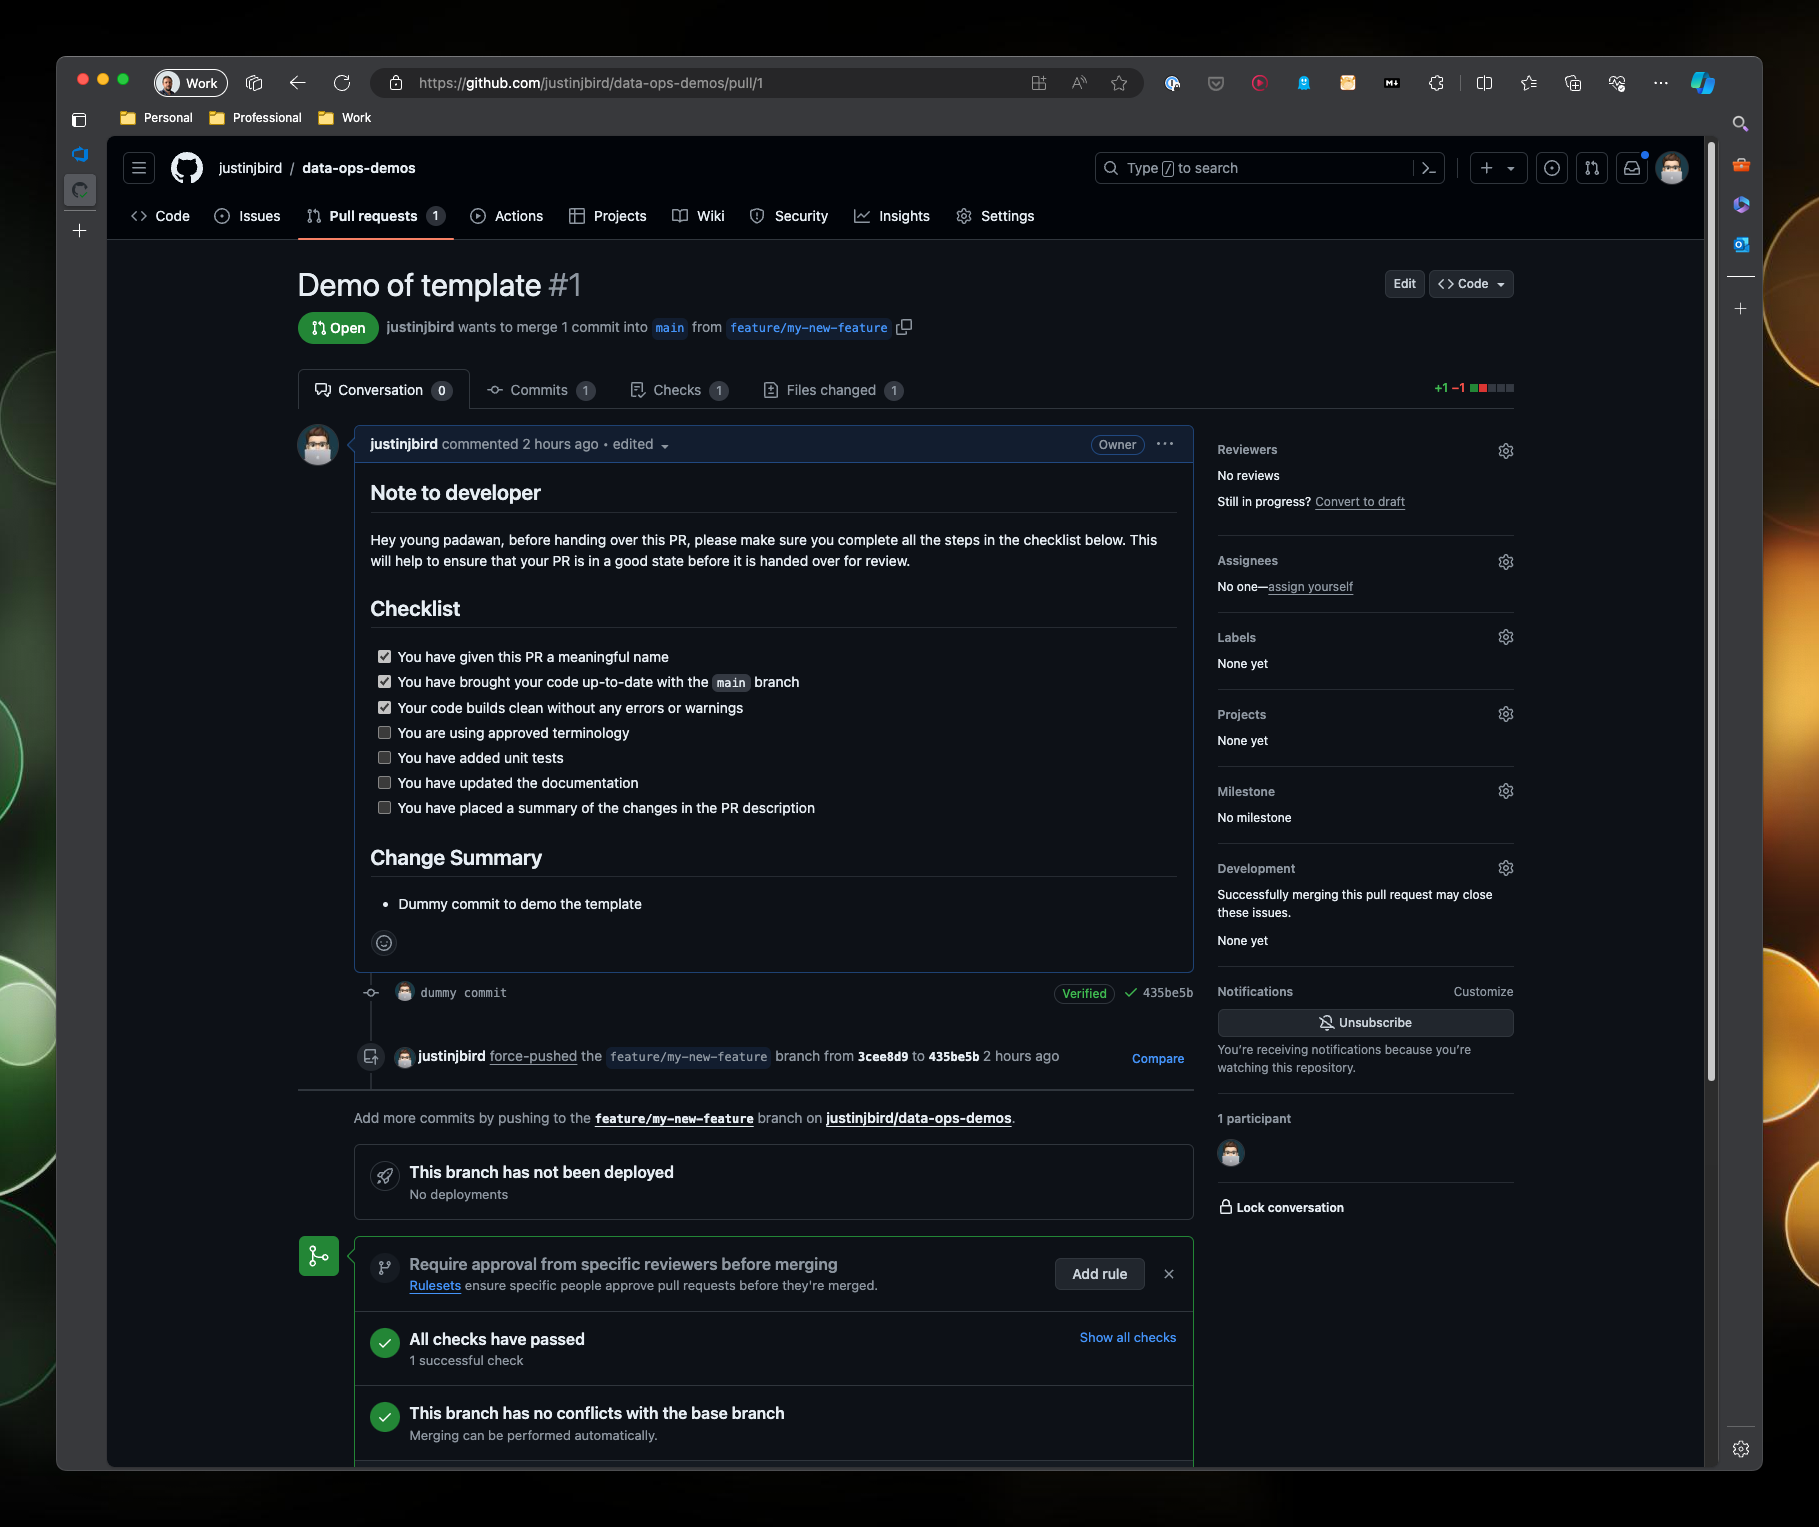 A screenshot of the Git Hub pull request screen, the template is displayed with the checklist shown as a set of checkboxes, some of the checkboxes have been ticked.